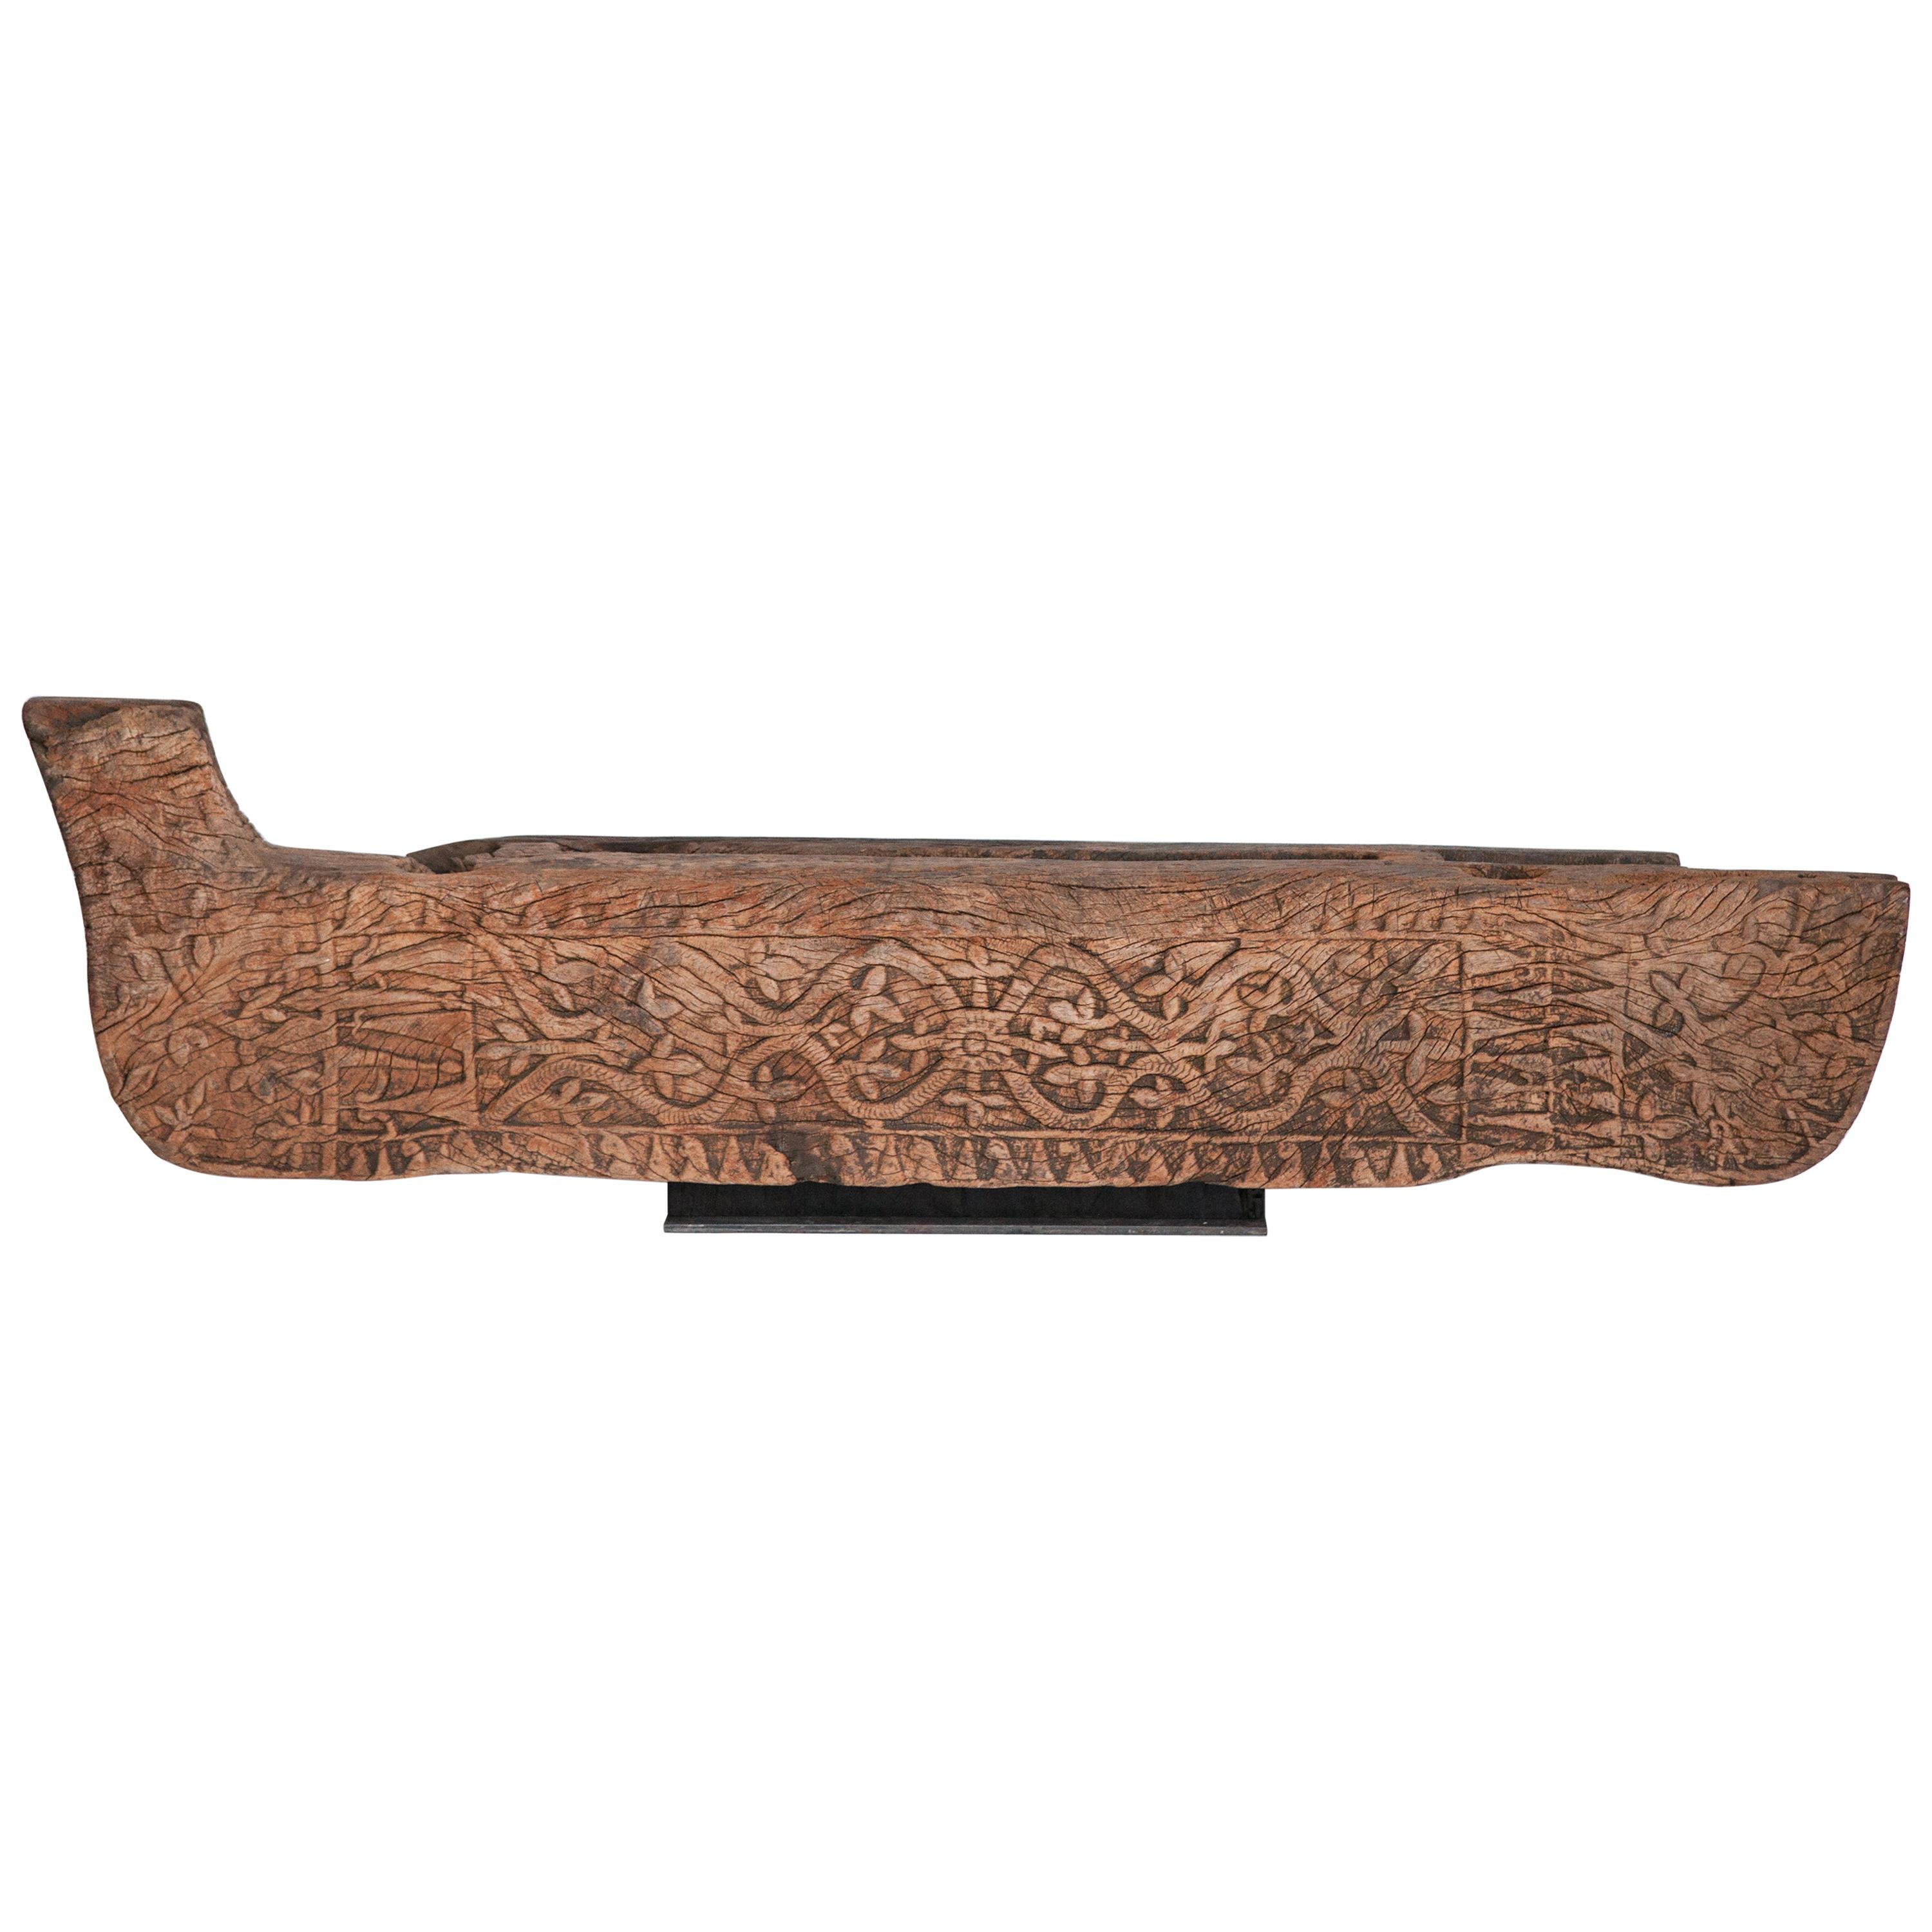 Tribal Wooden Carving from Flores, Indonesia, Early-Mid 20th Century, Mounted